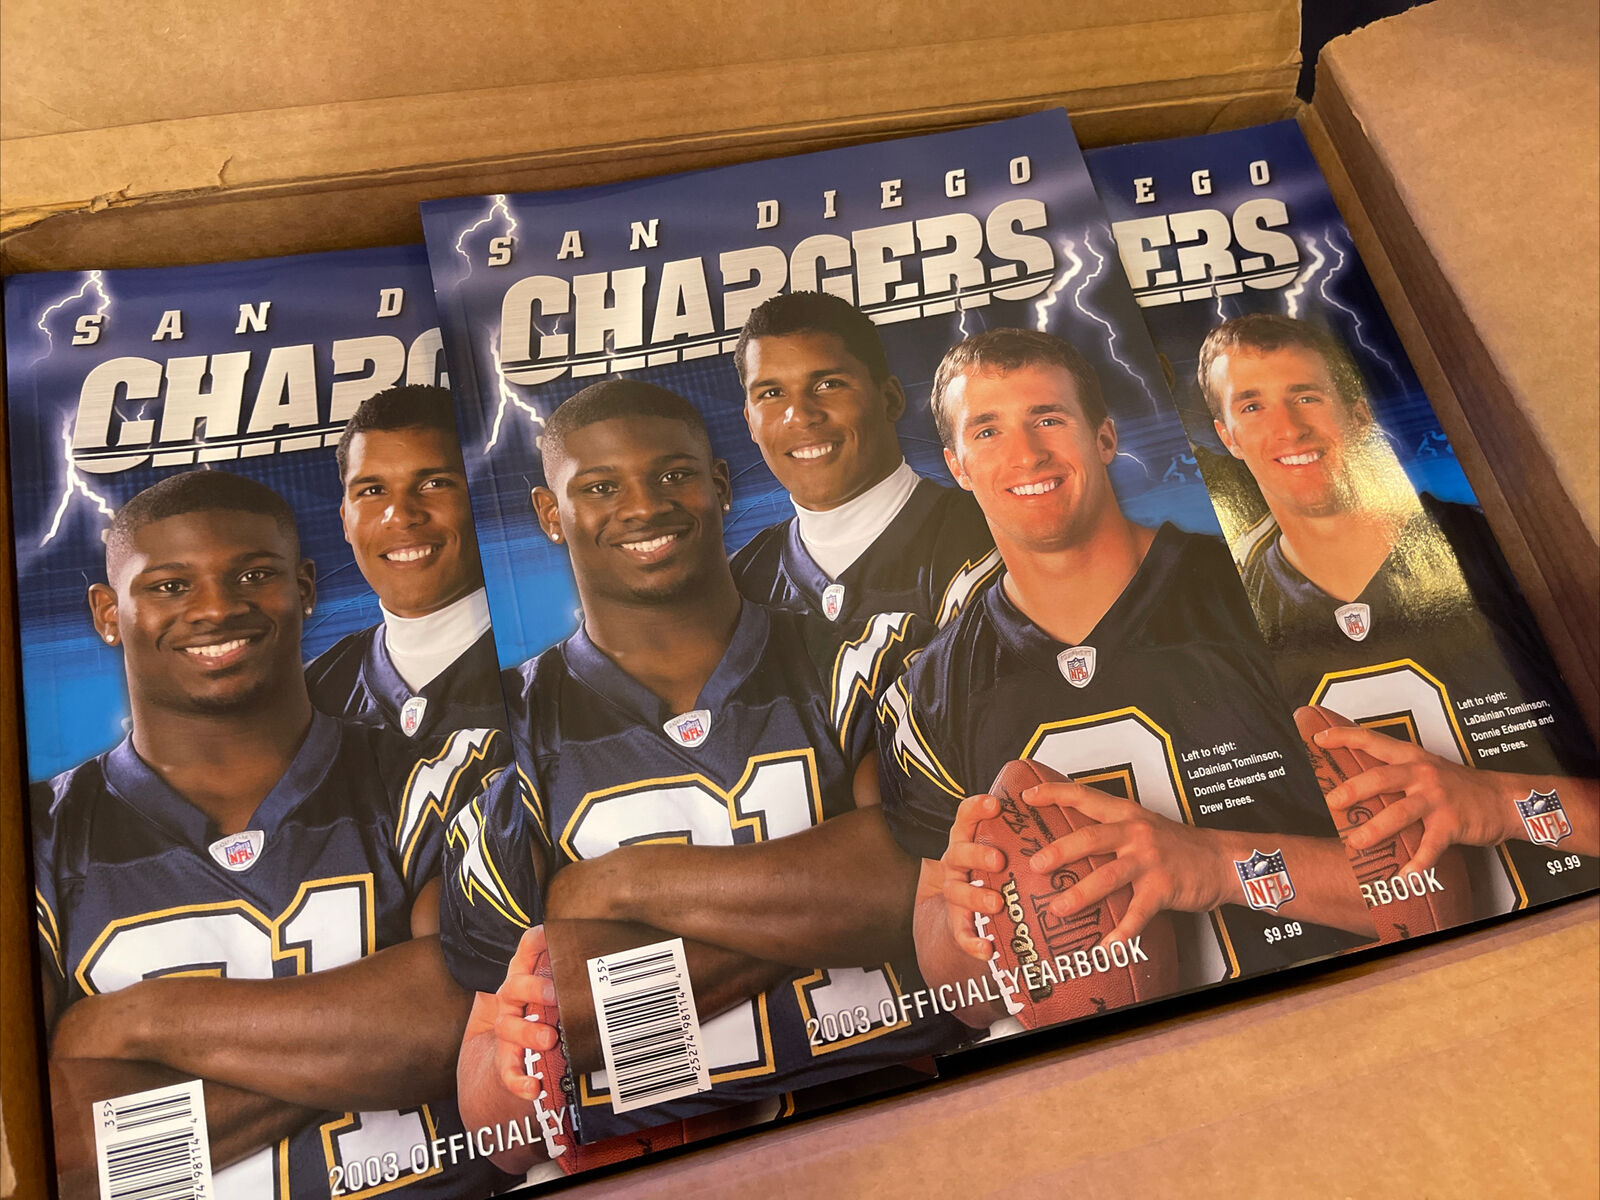 New sales Vintage Max 50% OFF san diego chargers nfl official yearbook 2003 team brand